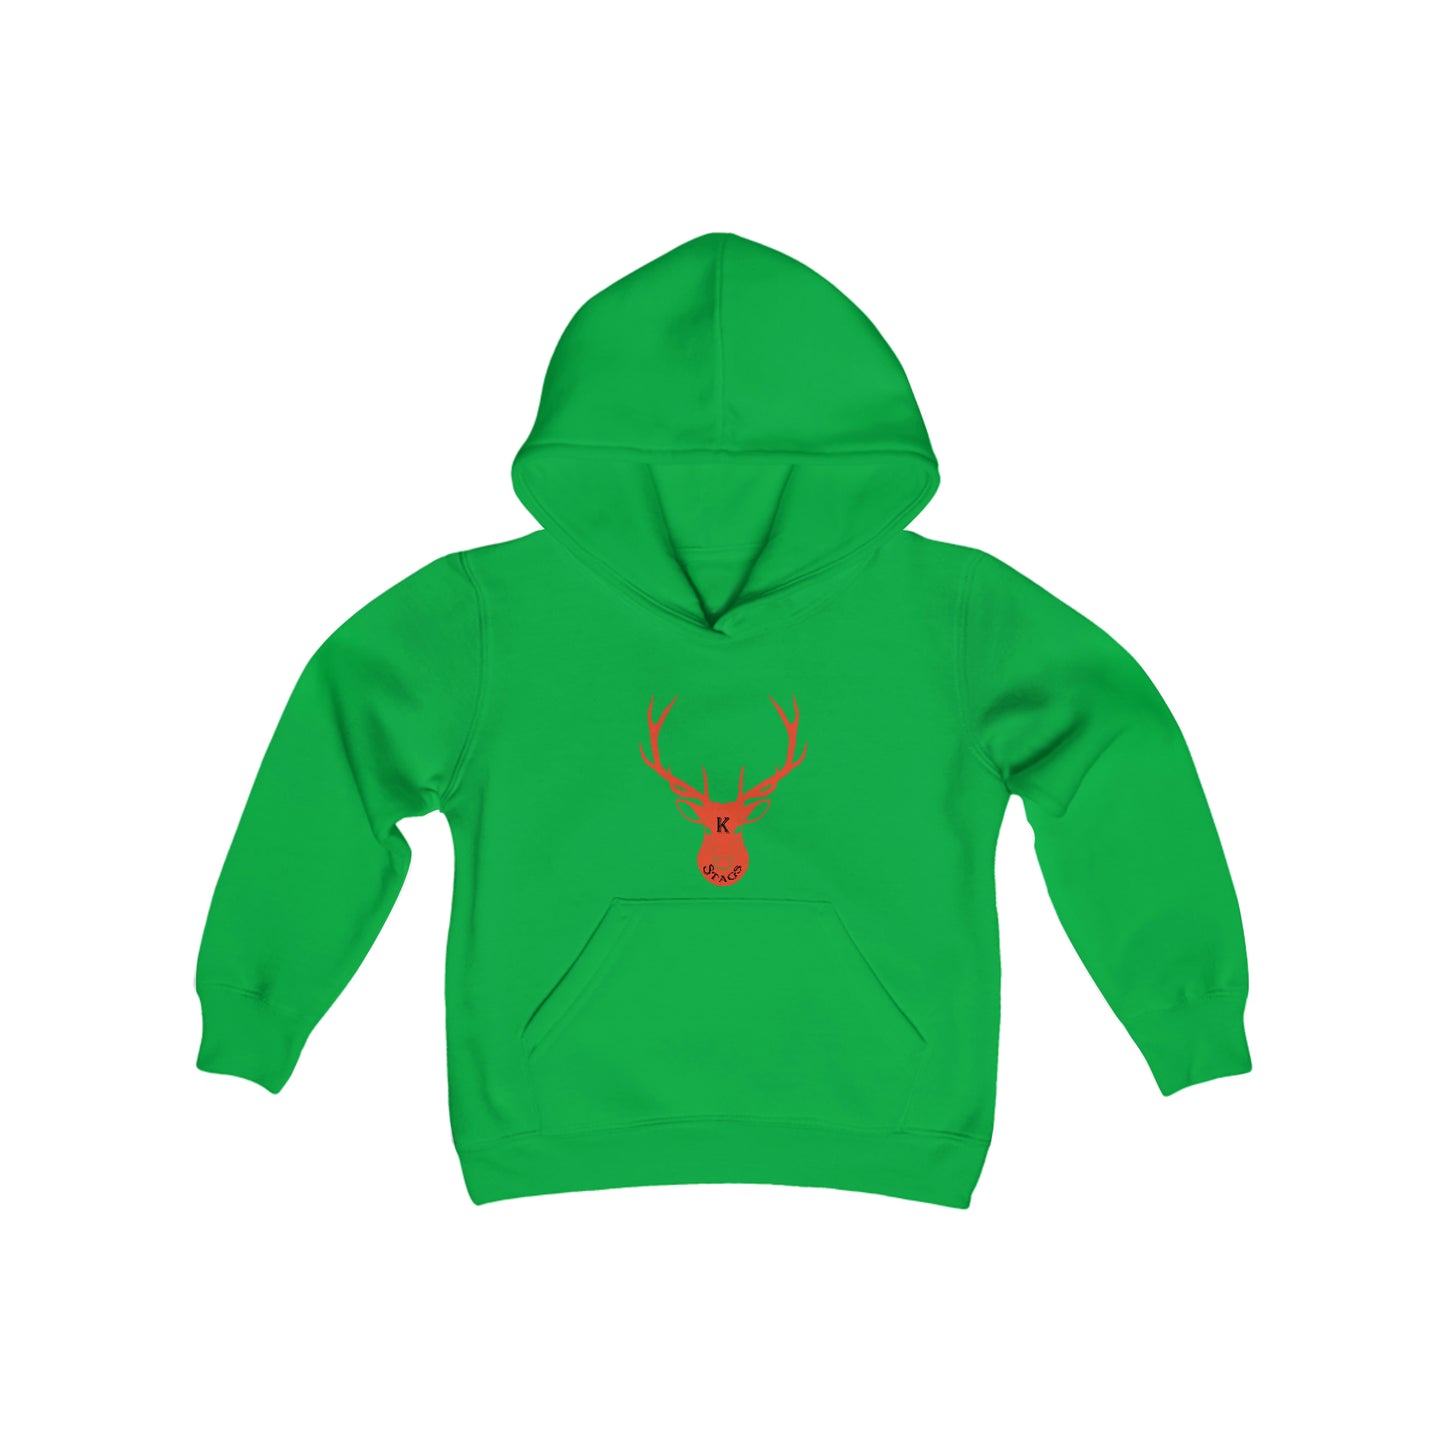 Stag Logo 3 Youth Heavy Blend Hooded Sweatshirt   #H05-02G